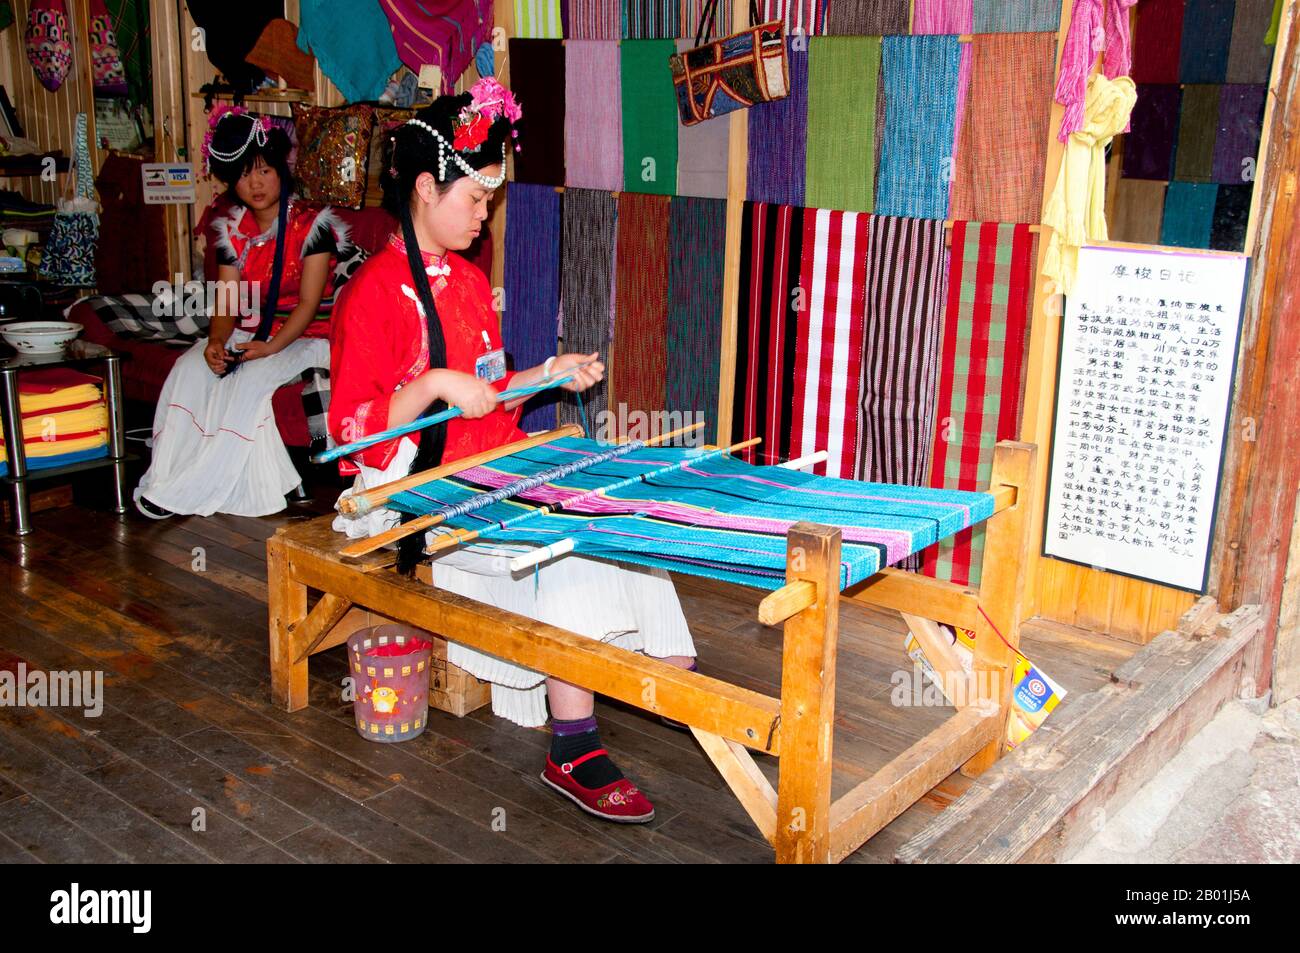 China: Mosuo woman weaving in Lijiang Old Town, Yunnan Province.  The Mosuo (also Moso or Musuo), but known often to themselves as the Na, are a small ethnic group living in Yunnan and Sichuan Provinces, close to the border with Tibet. With a population of approximately 40,000, most of them live in the Yongning region and around Lugu Lake, high in the Tibetan Himalayas.  Although the Mosuo are culturally distinct from the Nakhi, the Chinese government places them as members of the Nakhi (aka Naxi) minority.  The Old Town of Lijiang dates back more than 800 years and was once an important town. Stock Photo